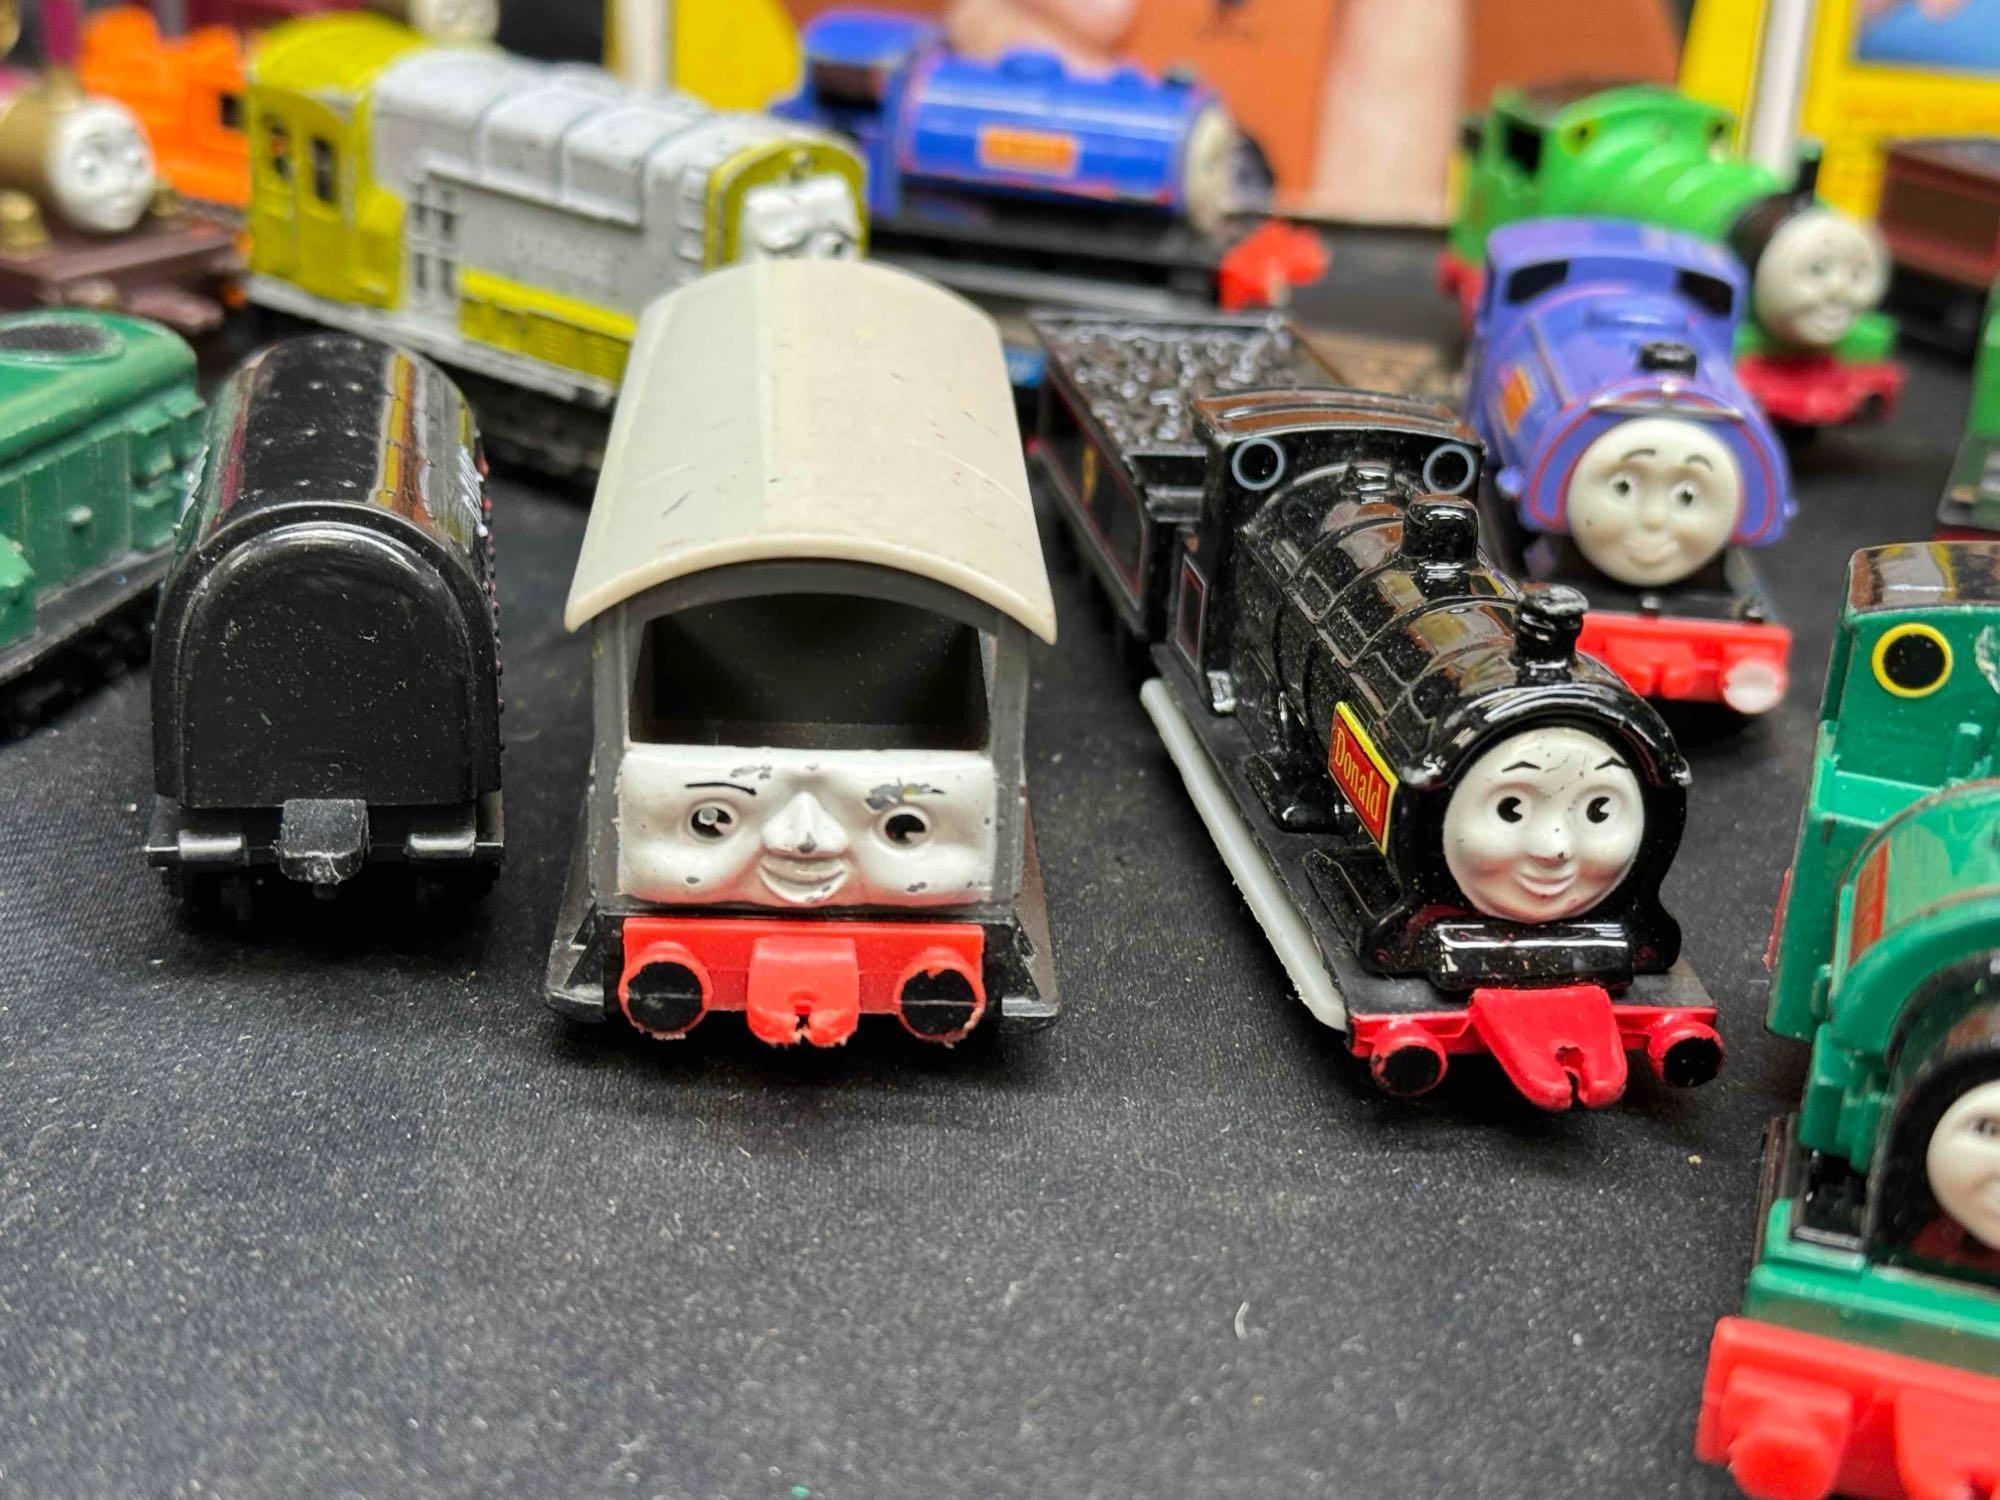 Thomas the Tank Engine and Toy Train accessories